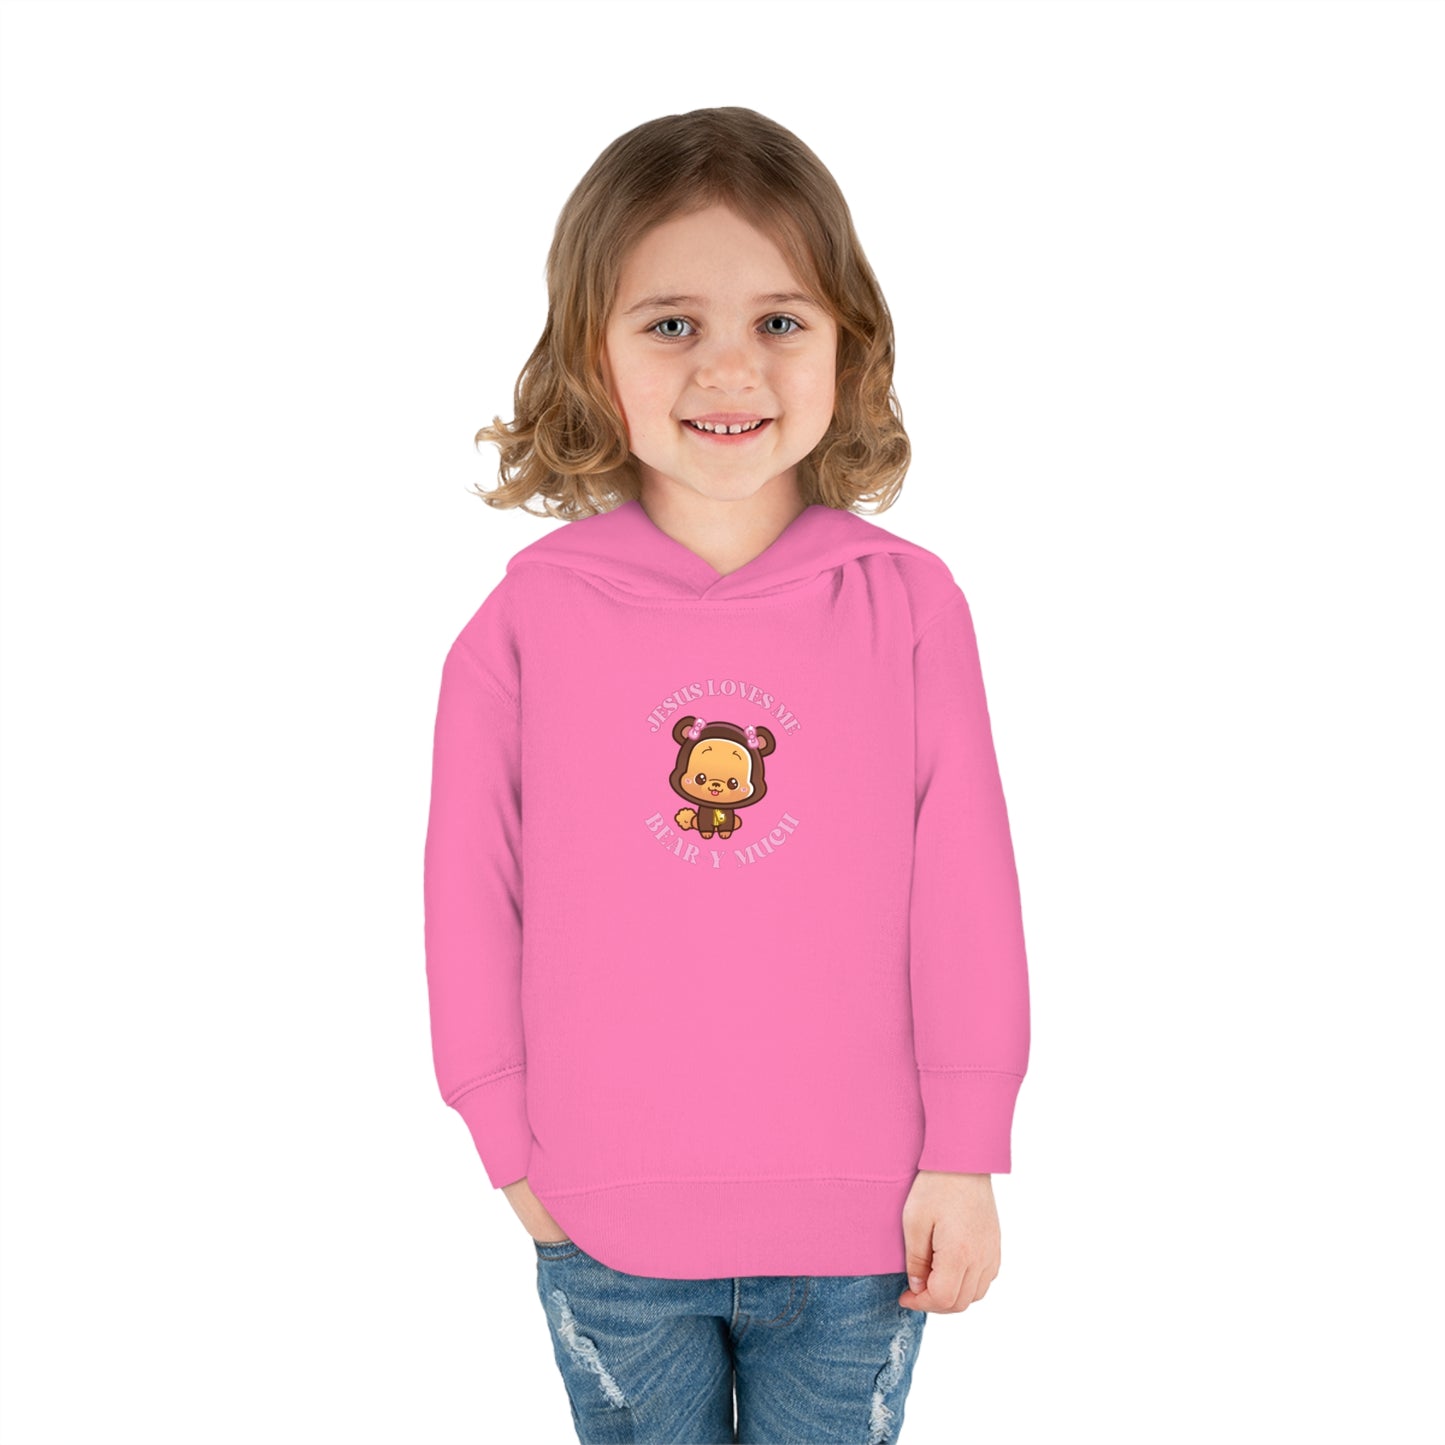 Jesus Loves Me Beary Much Kids Pullover Fleece Hoodie, Christian Pullover for Kids, Jesus Hoodie, Toddler & Youth Faith Apparel